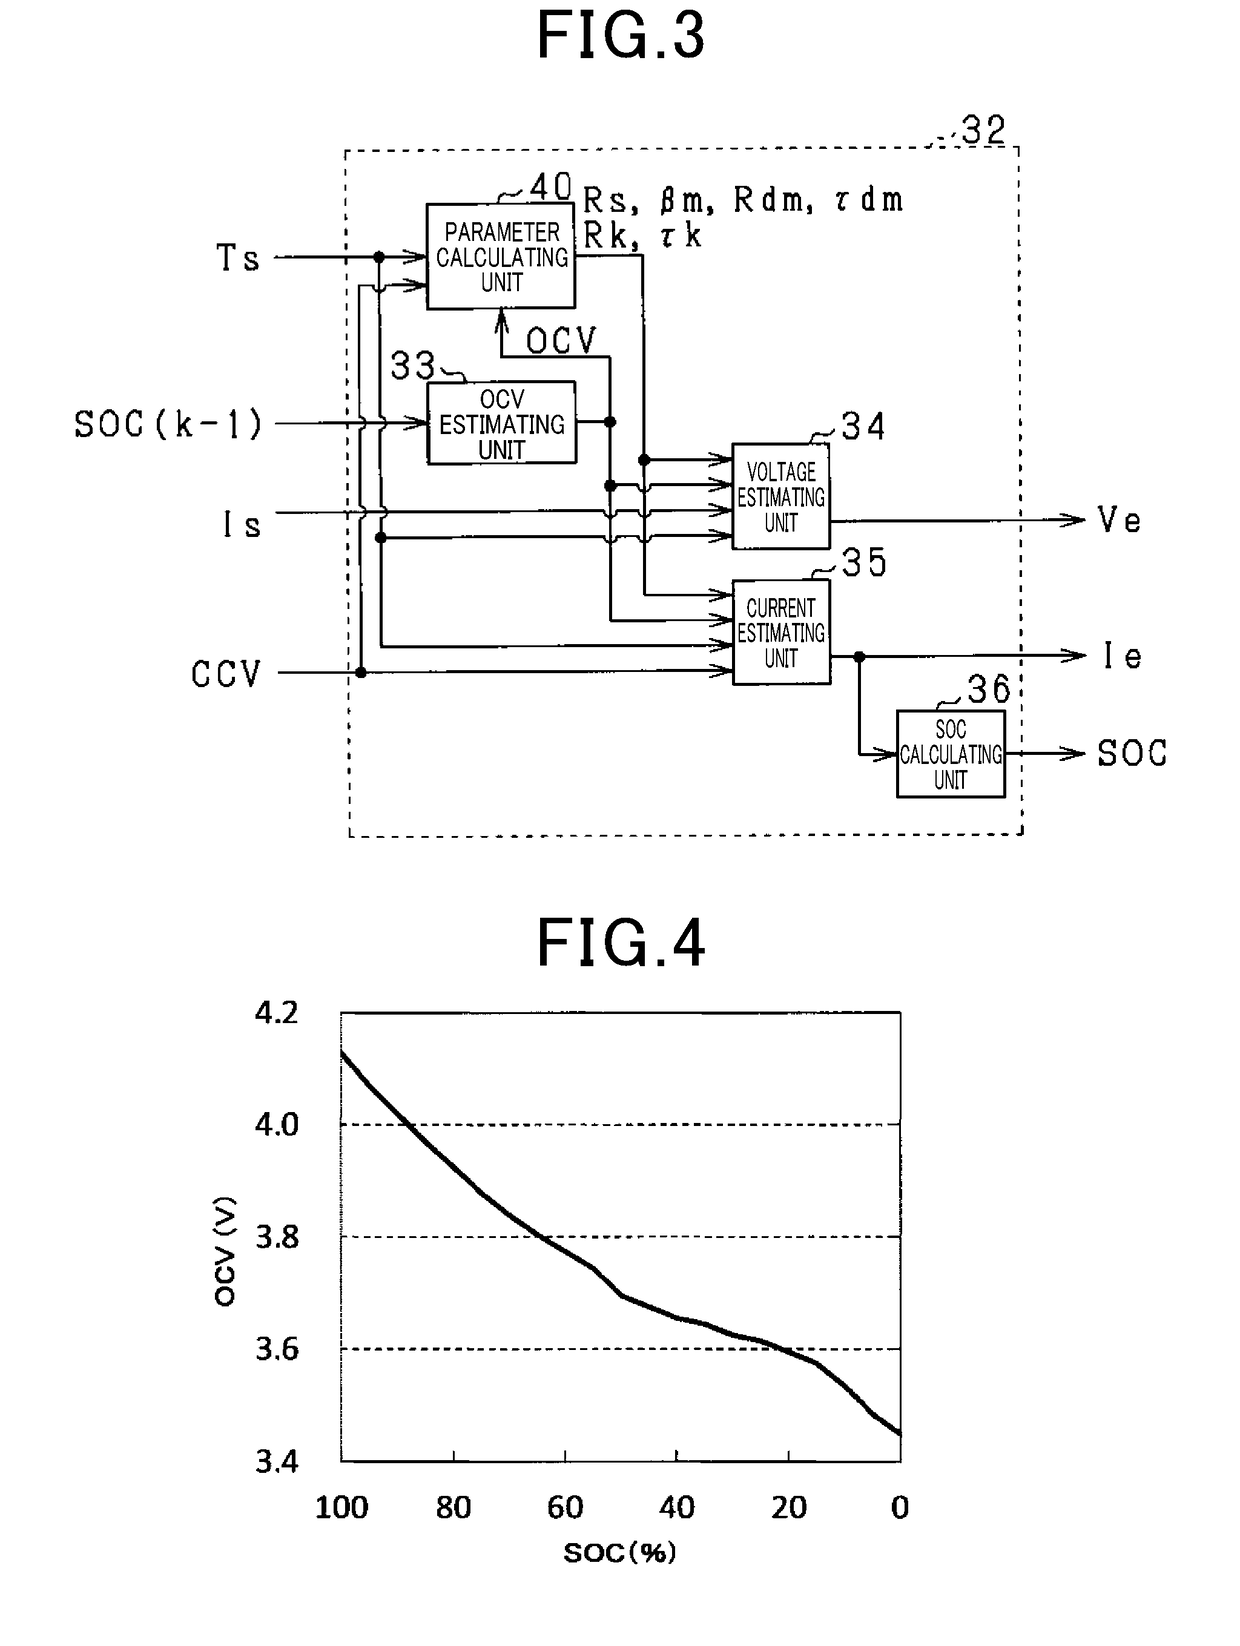 Battery state estimating device